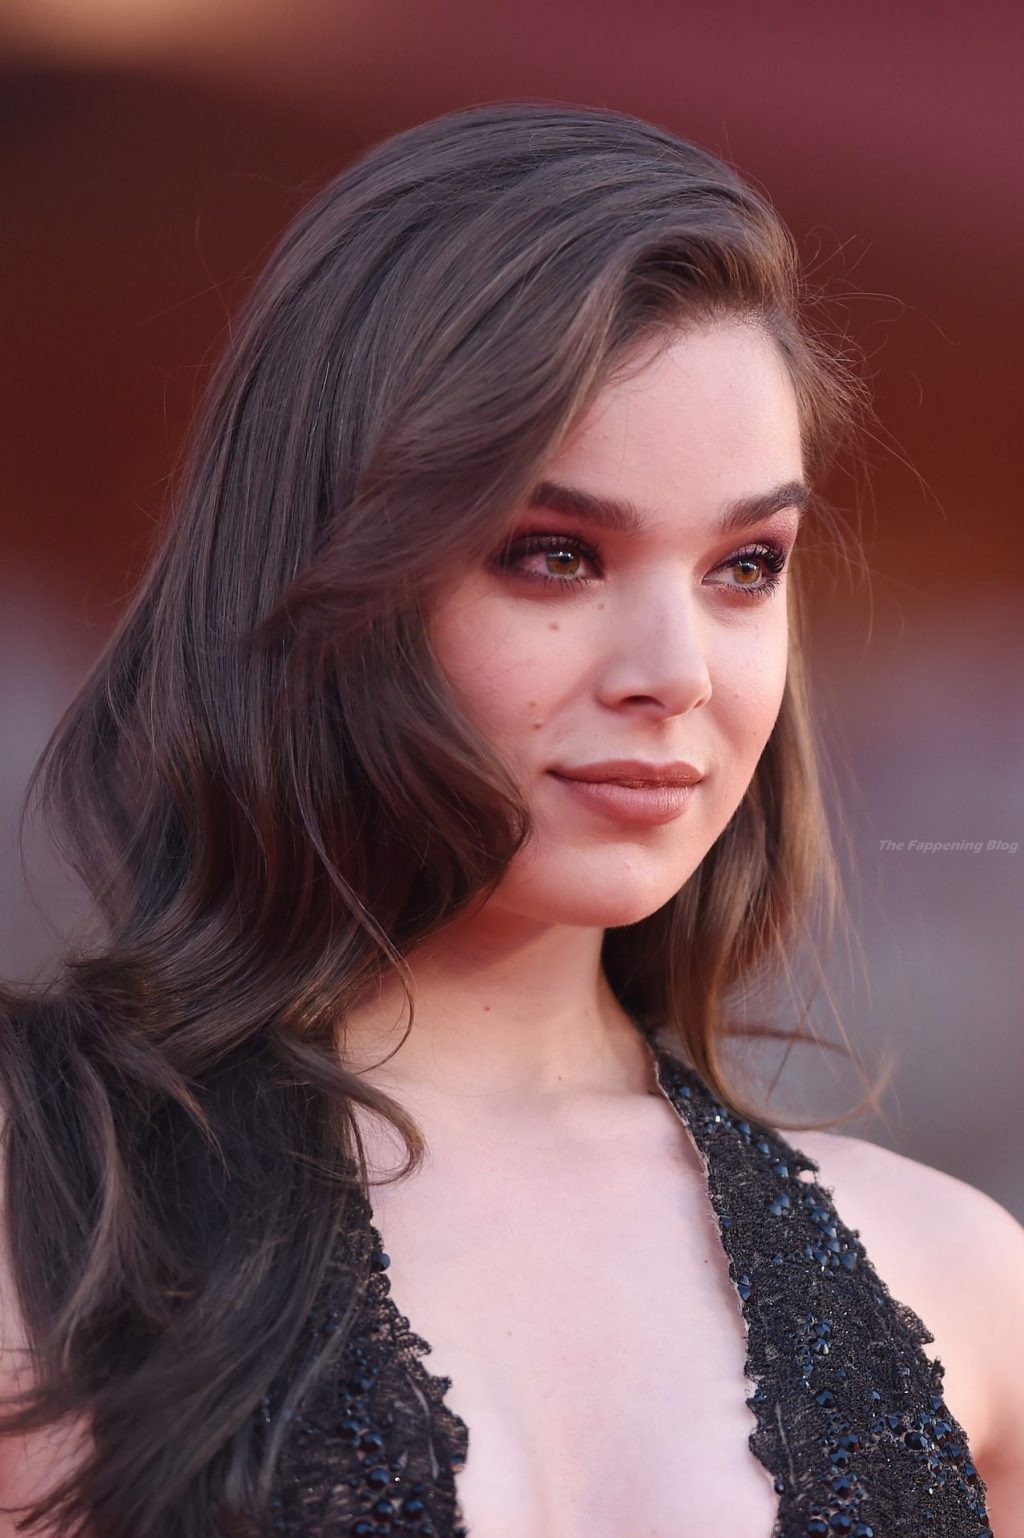 Hailee Steinfeld Flashes Her Toned Pins in a Black Dress at the Official Competition Premiere in Venice (117 Photos) [Updated]